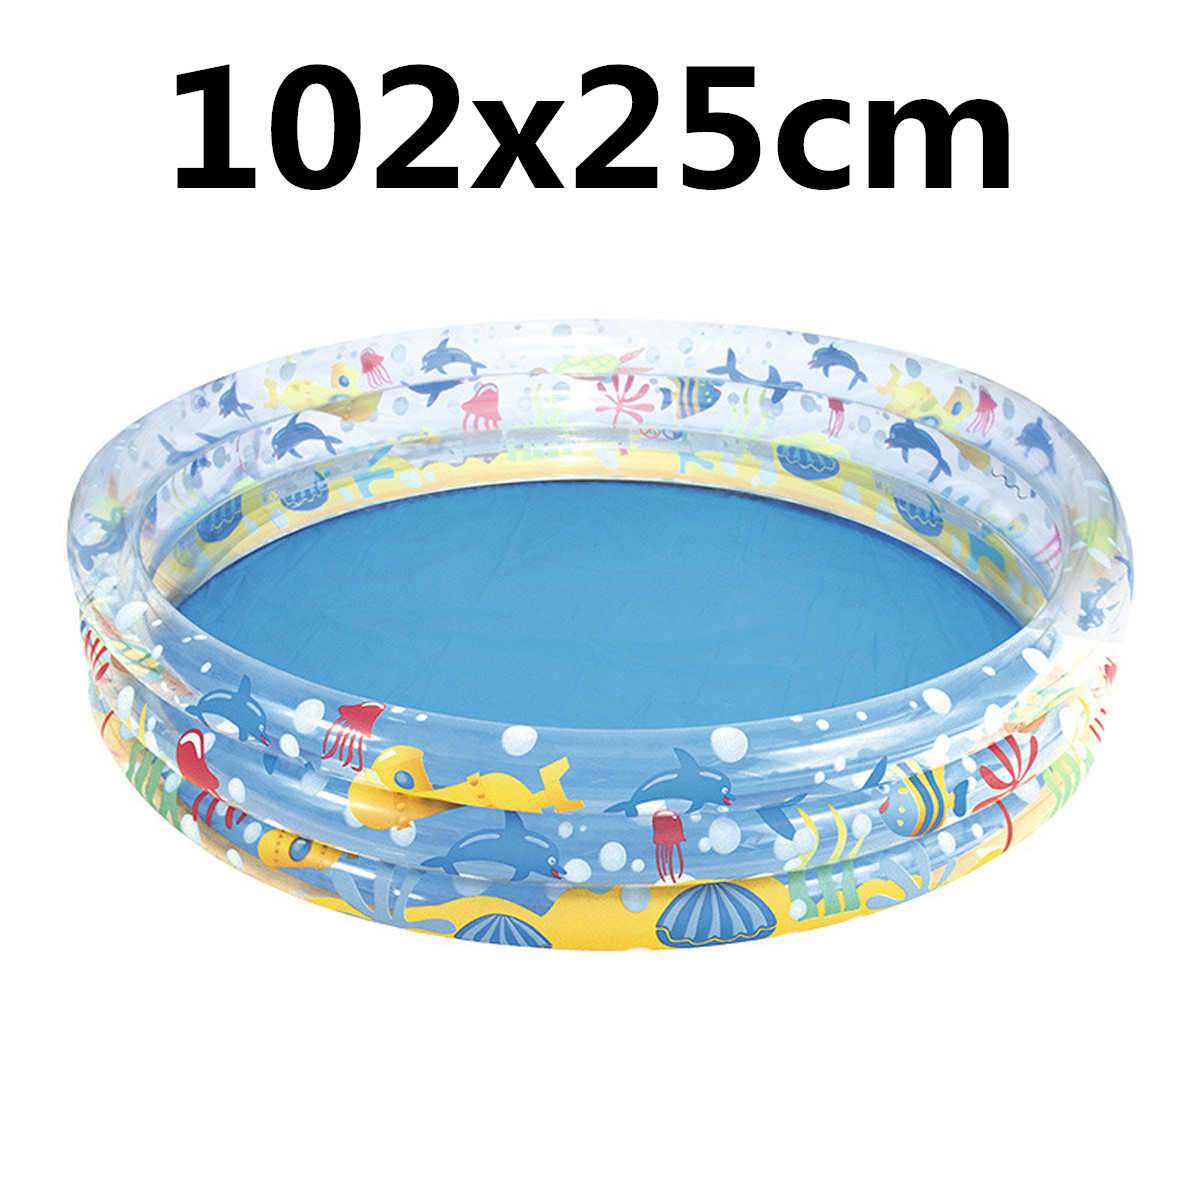 PVC-Round-Inflatable-Swimming-Pool-High-Quality-Childrens-Paddling-Pool-Outdoor-Camping-Travel-1780881-2